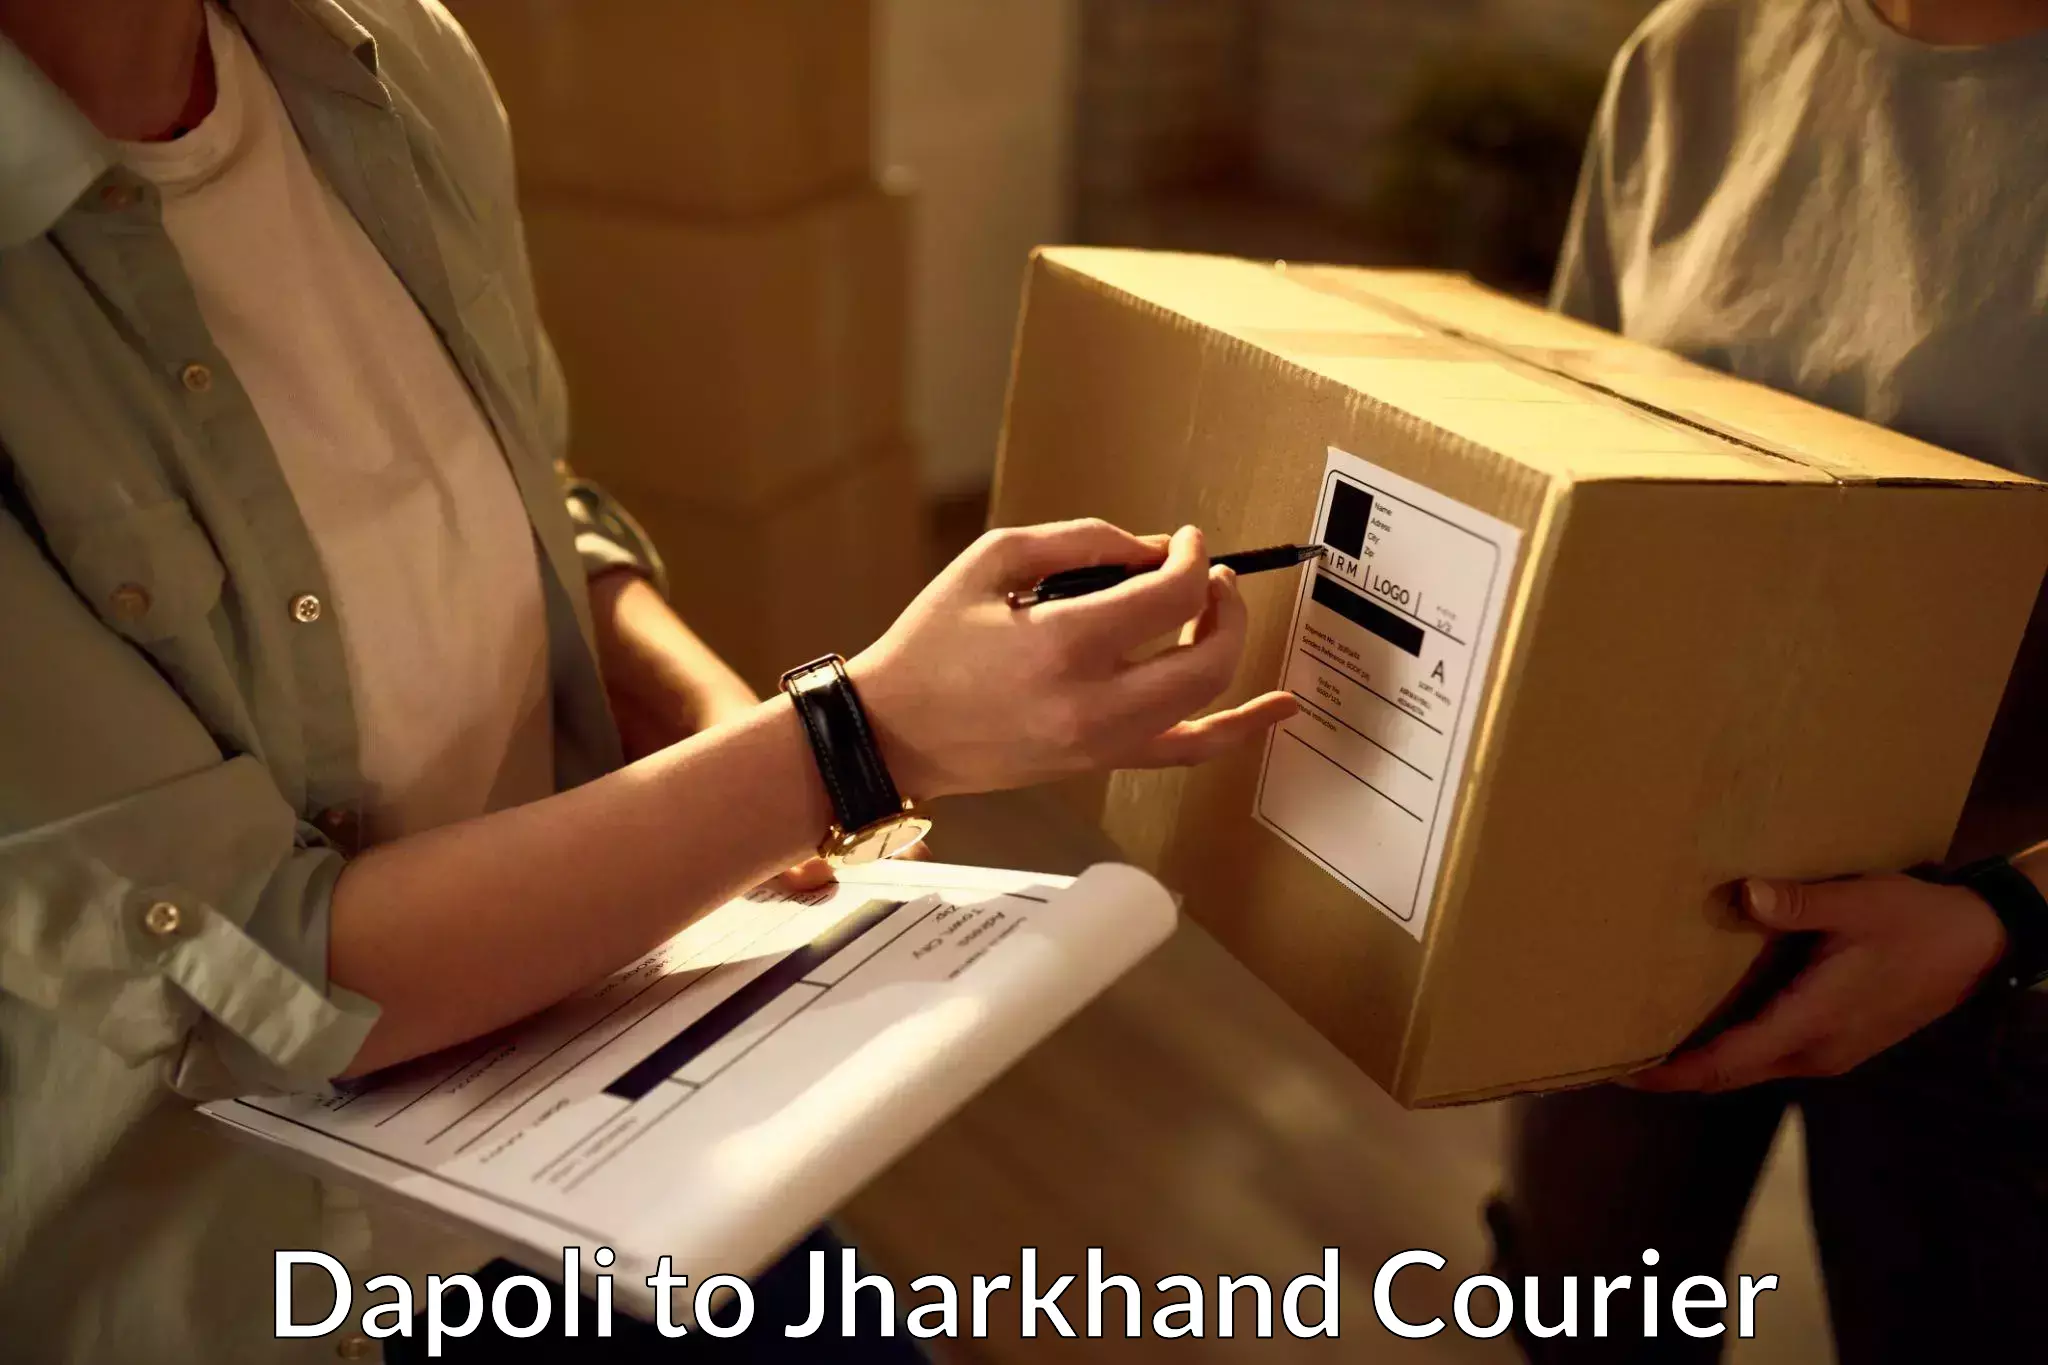 State-of-the-art courier technology Dapoli to Godabar Chatra